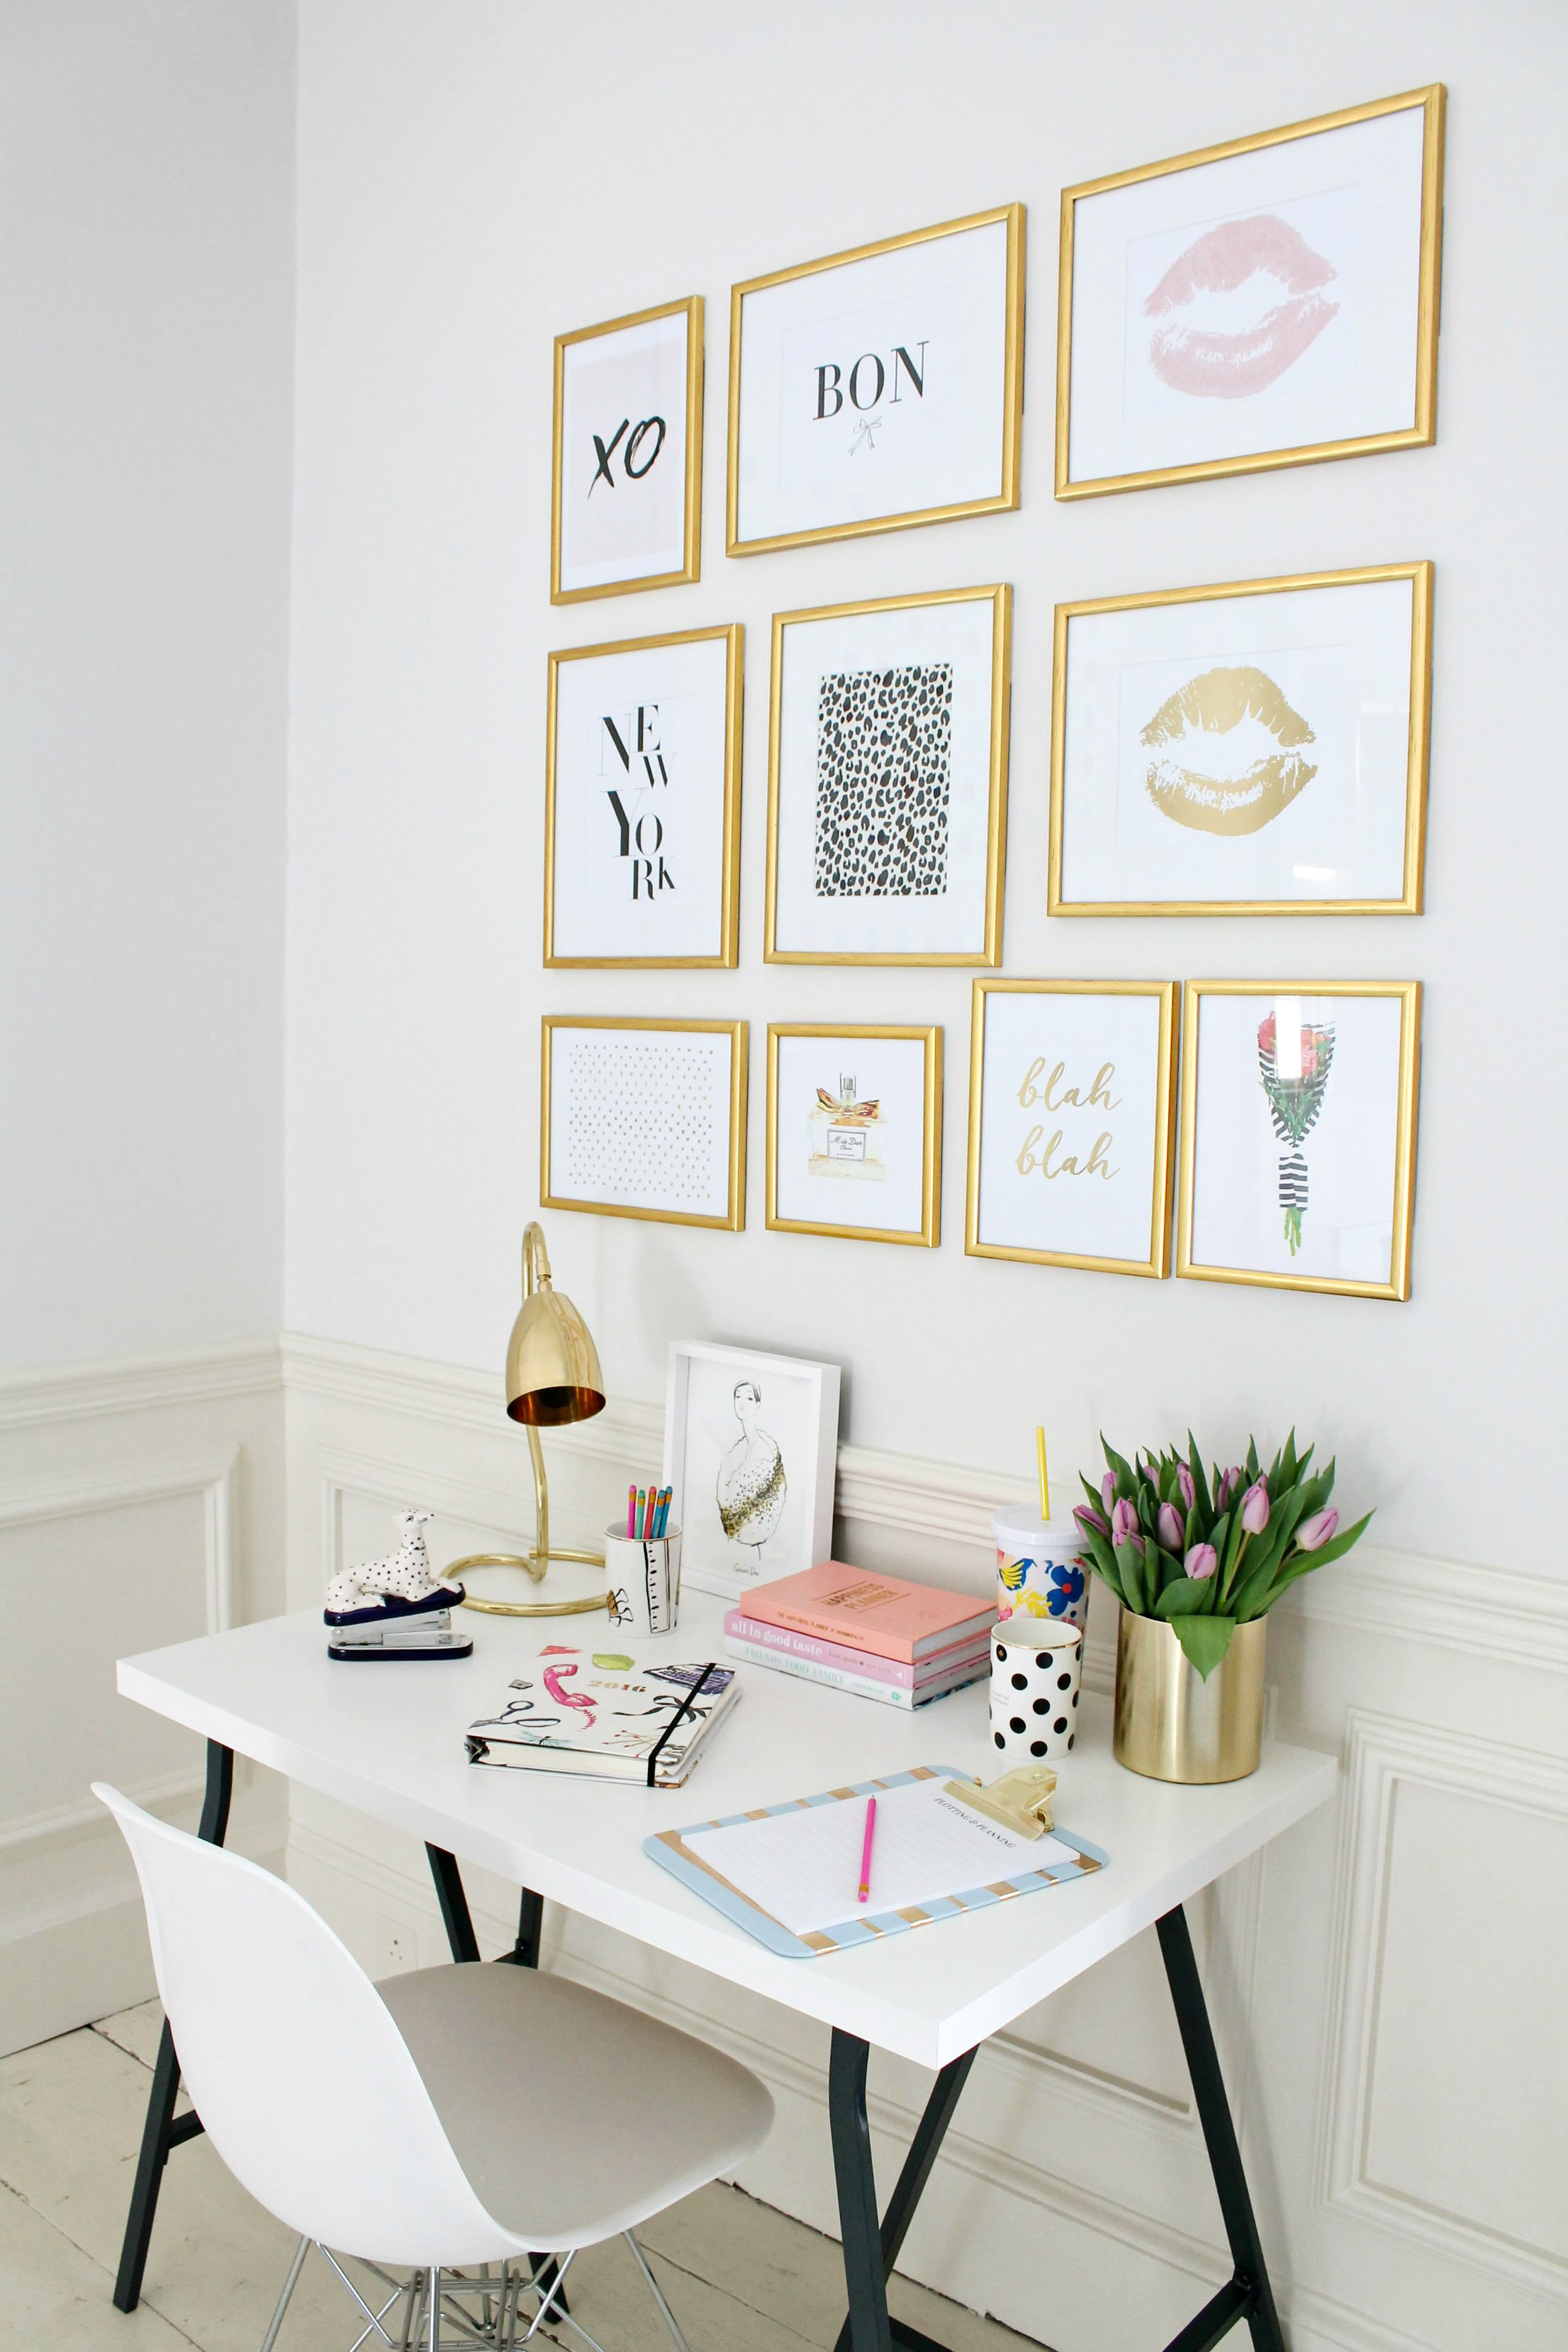 How to create a gallery wall without hammer and nails. - Little Big Bell